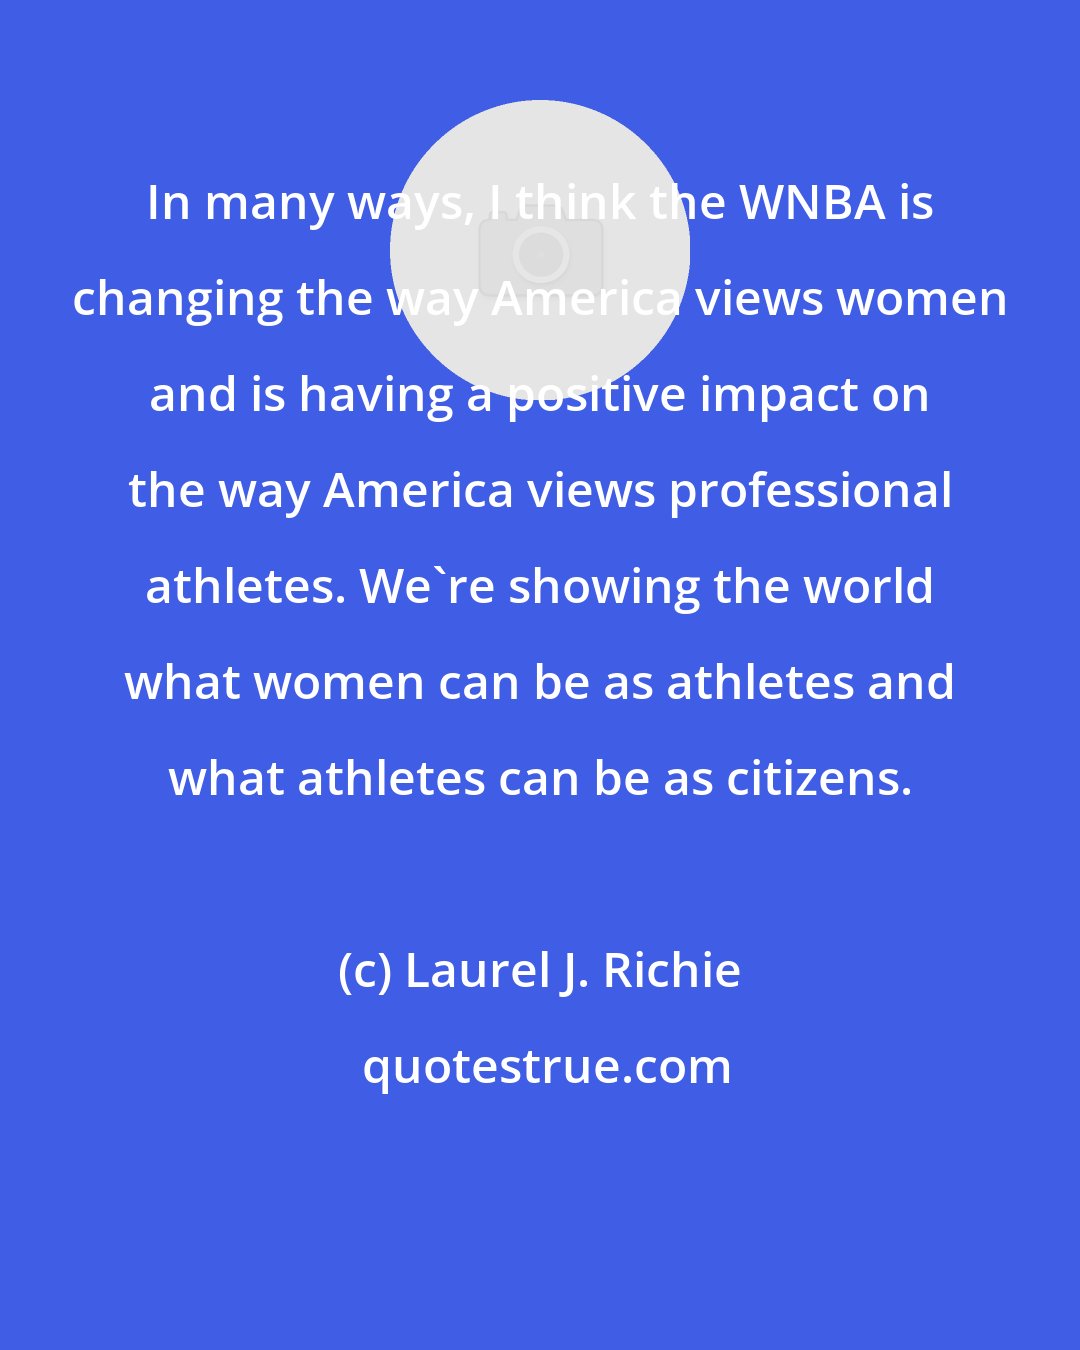 Laurel J. Richie: In many ways, I think the WNBA is changing the way America views women and is having a positive impact on the way America views professional athletes. We're showing the world what women can be as athletes and what athletes can be as citizens.